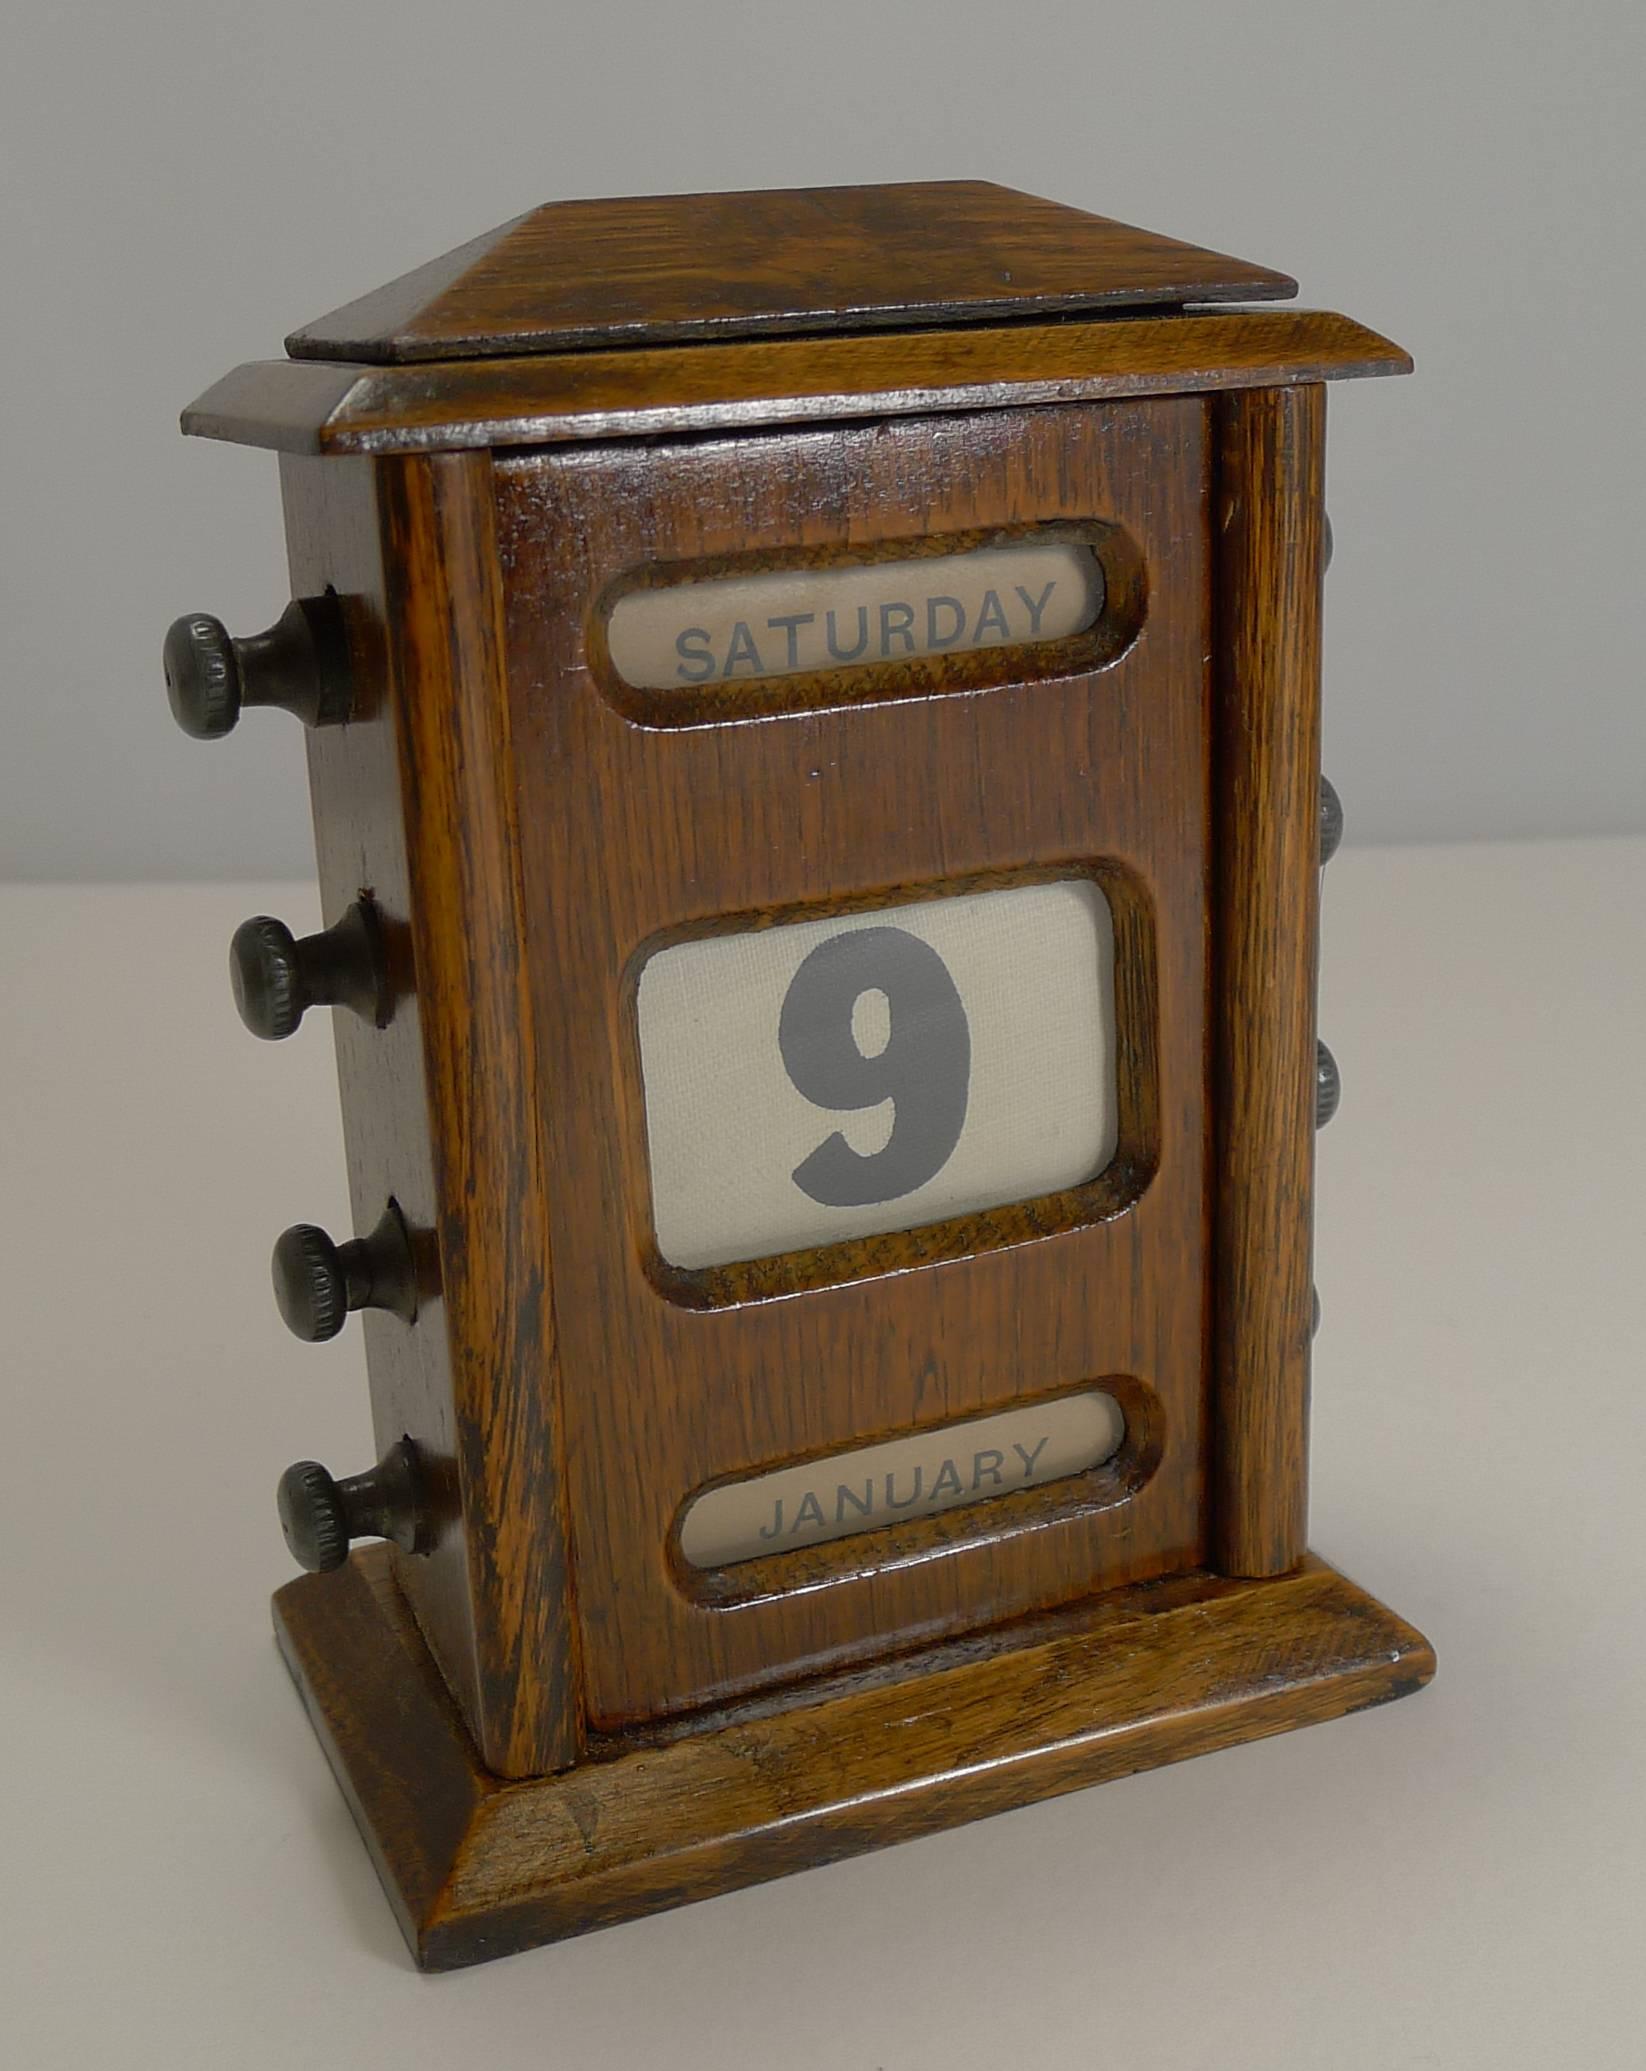 A most handsome English perpetual calendar made from solid English oak and dating circa 1900, late Victorian or Edwardian in era, this one beautifully polished and in great condition.

The four metal knobs to each side are used to move forward and